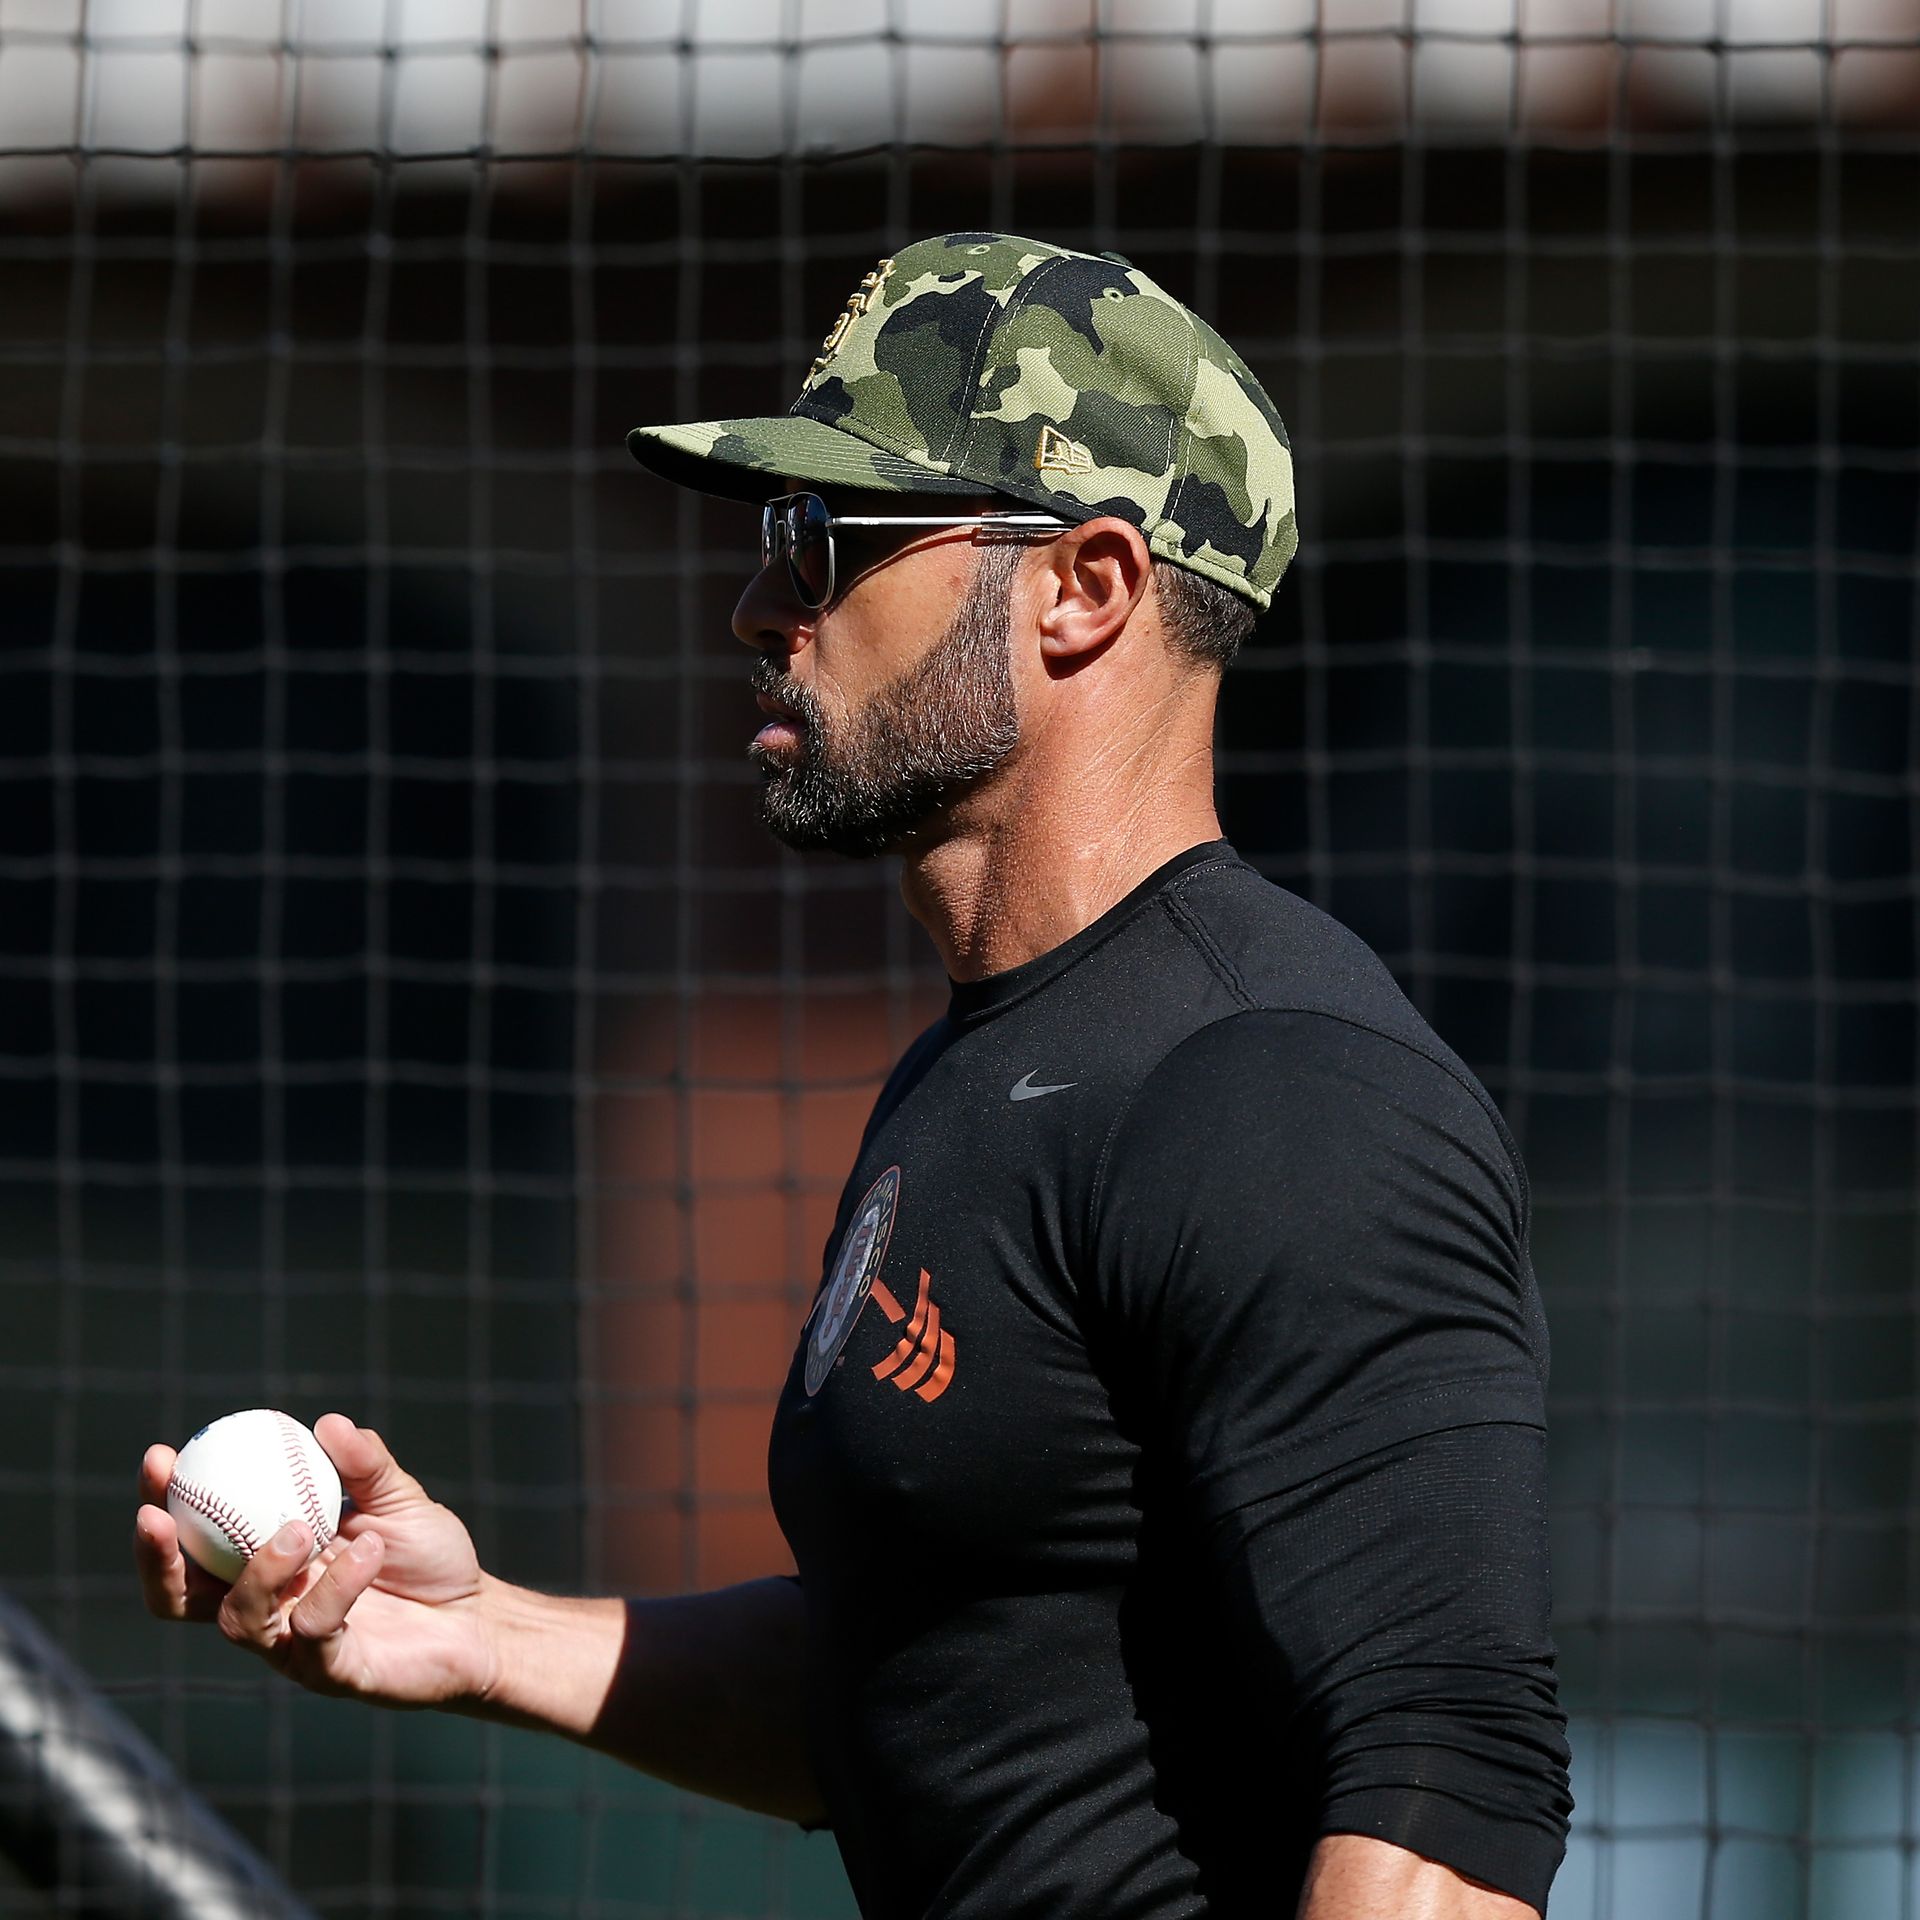 Manager Gabe Kapler of the San Francisco Giants looks on while